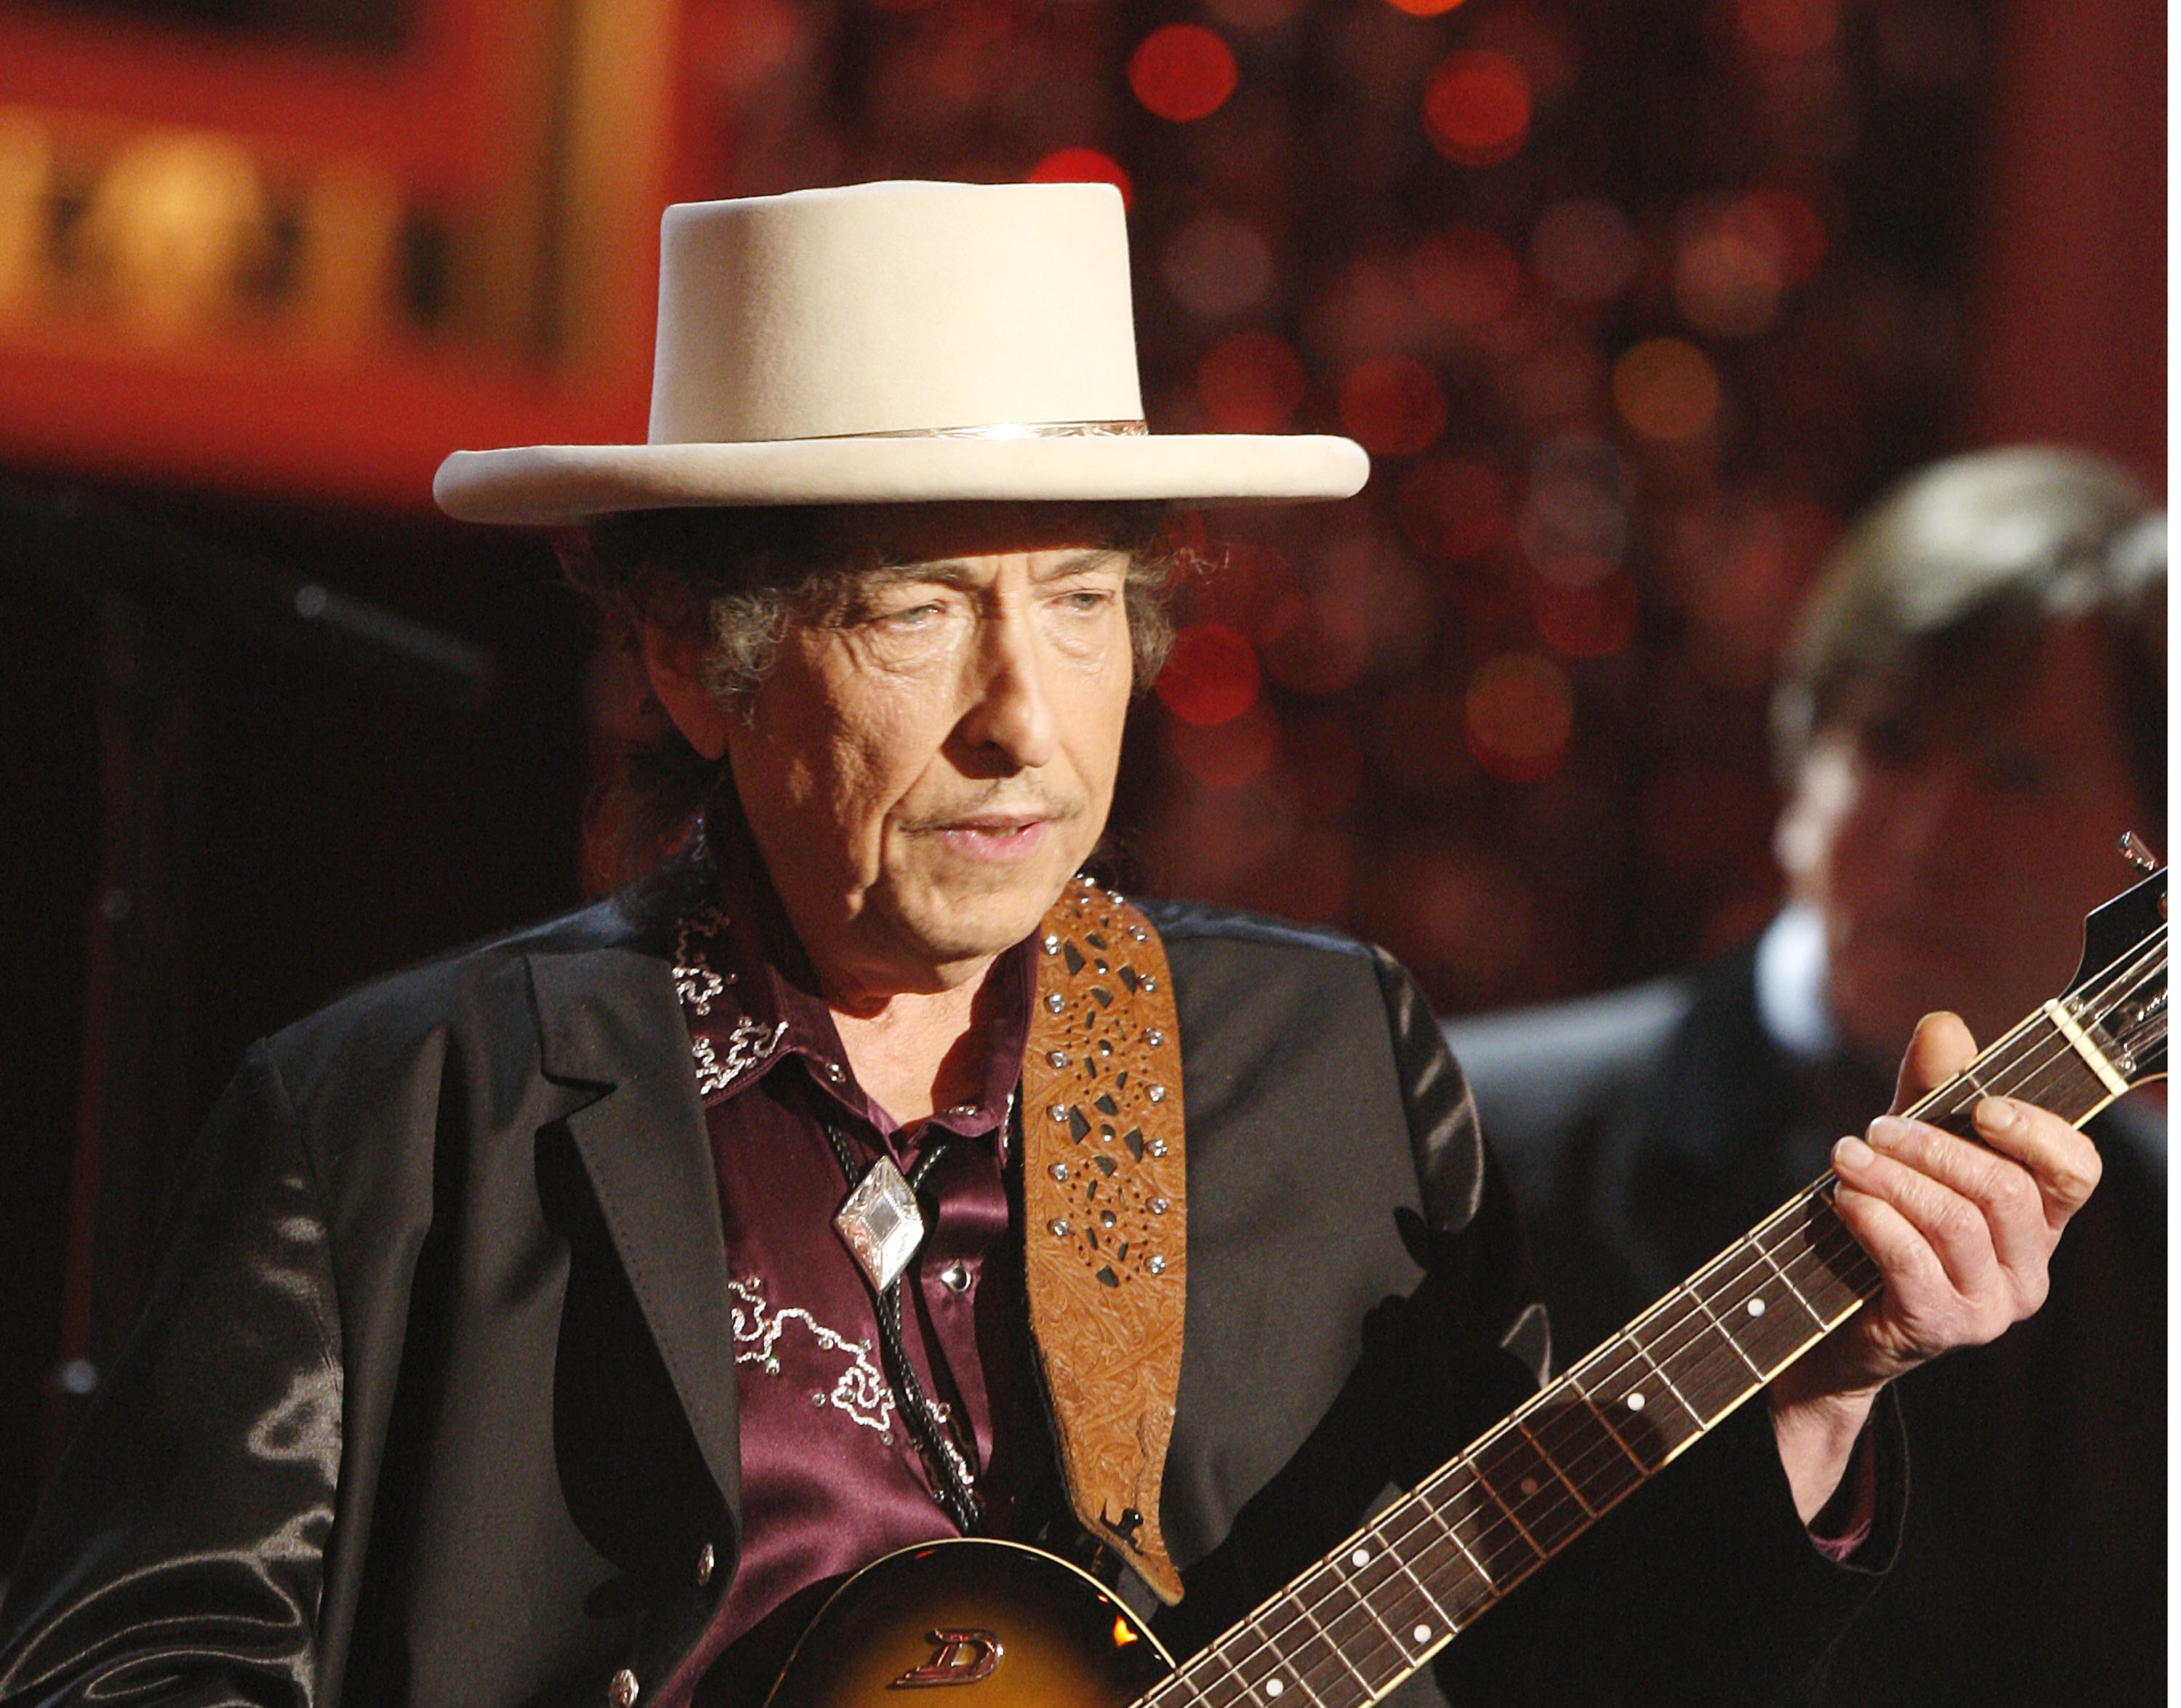 Bob Dylan wears a hat and plays the guitar.